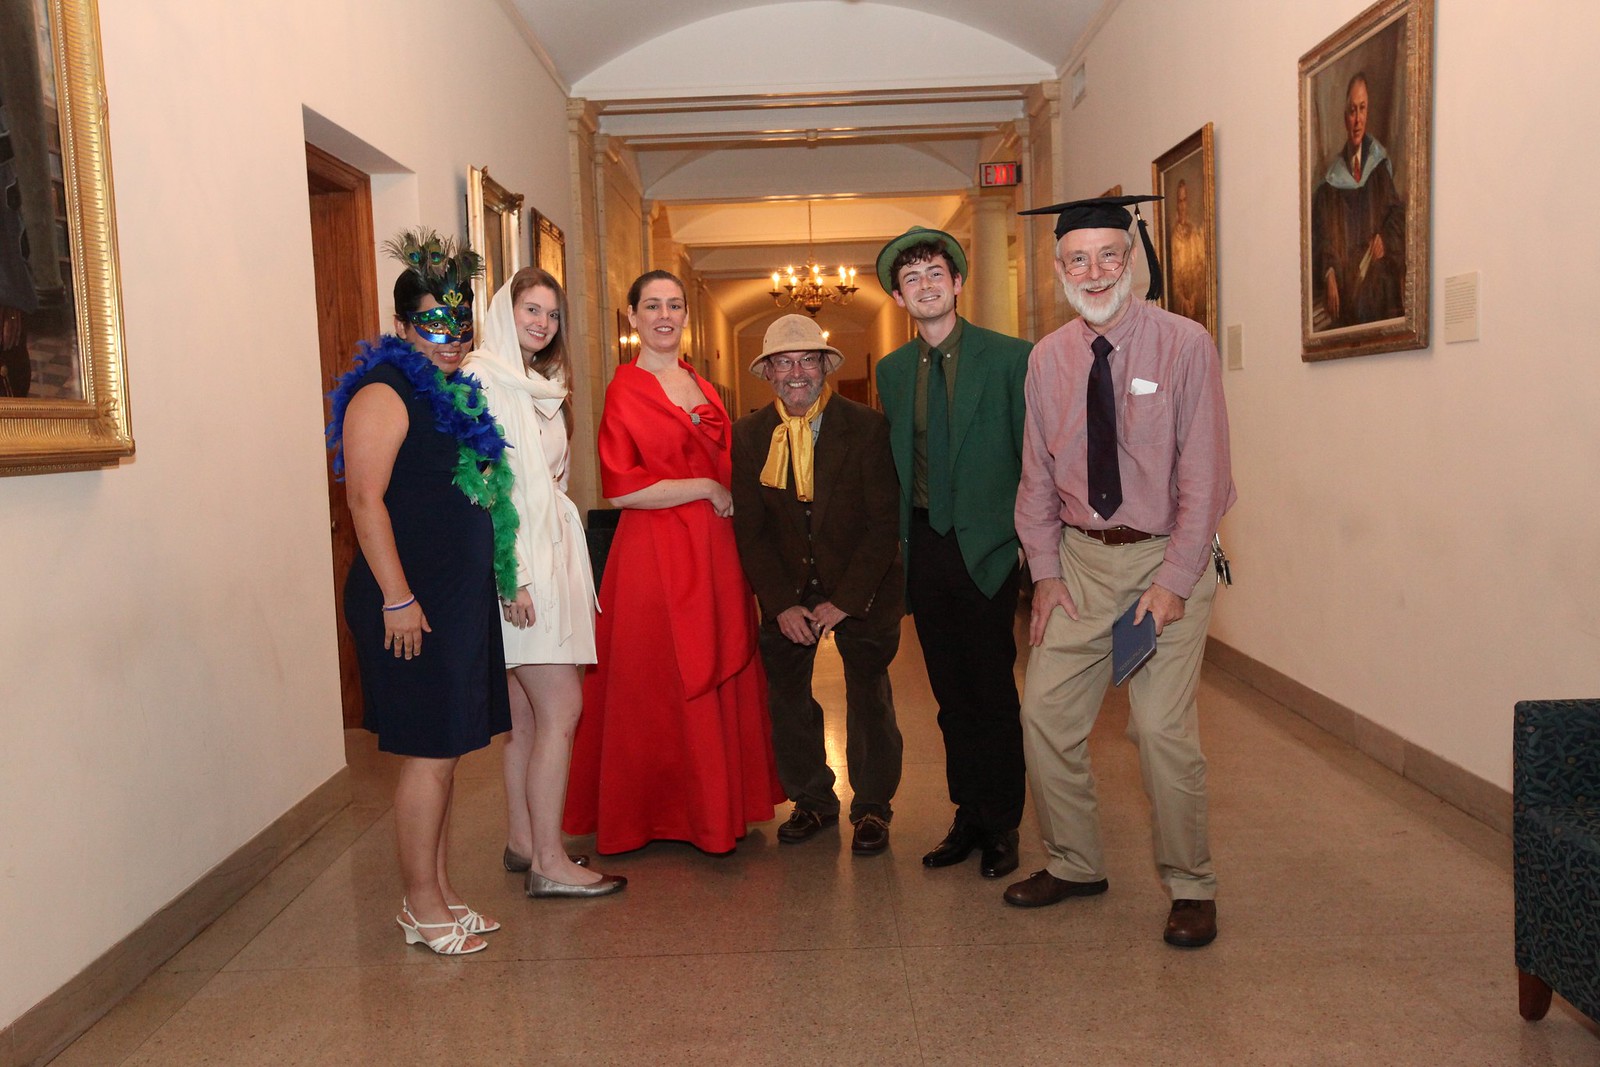 Wilson Library presents Clue, Fall 2013